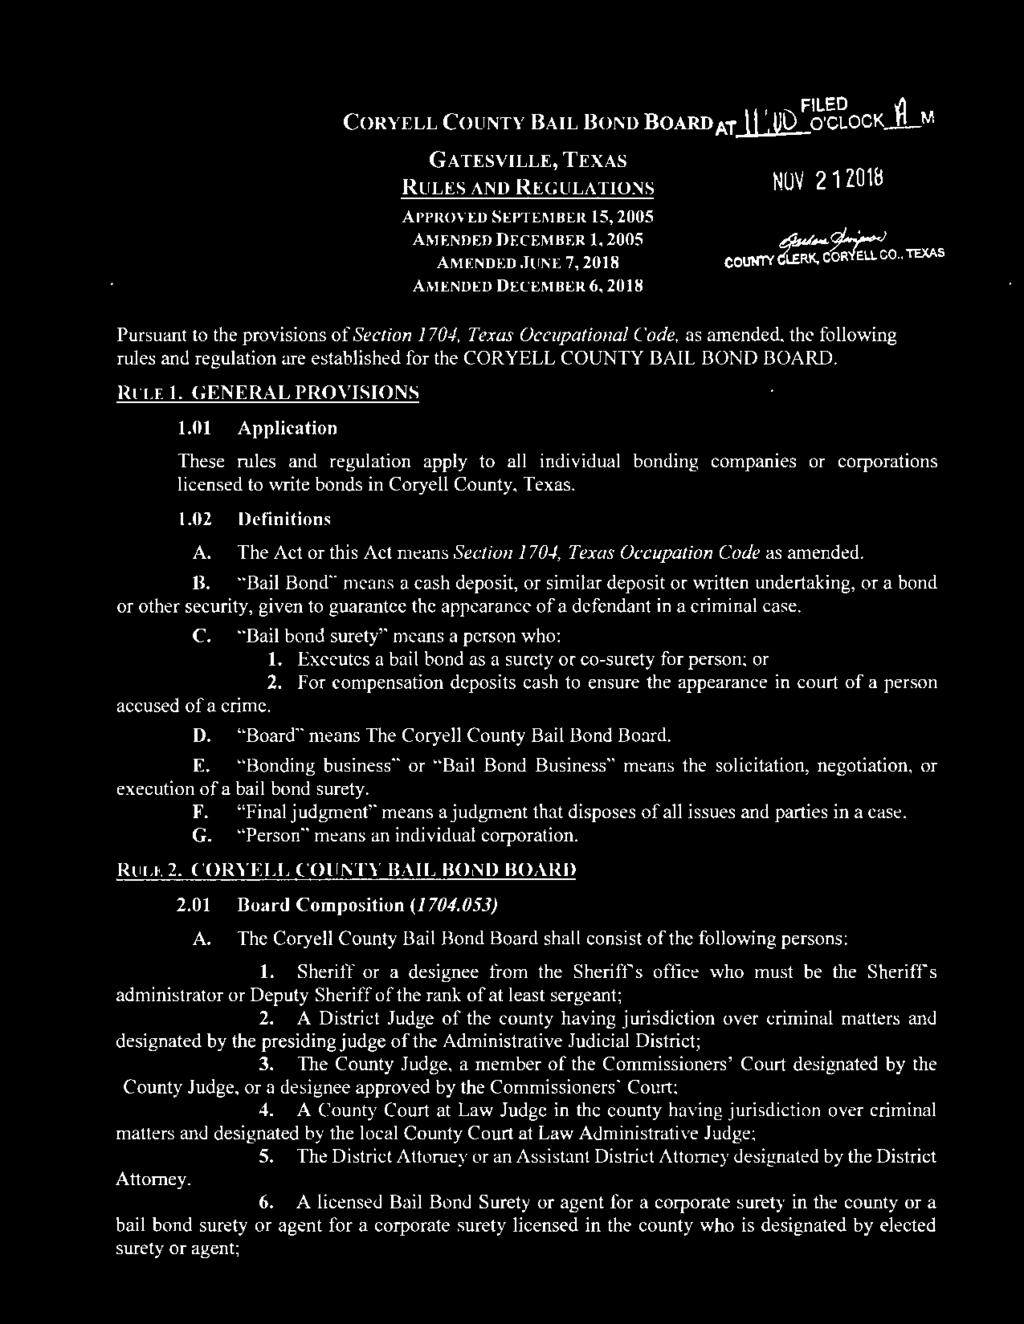 GENERAL PROVISIONS 1.01 Application These rules and regulation apply to all individual bonding companies or corporations licensed to write bonds in Coryell County, Texas. 1.02 Definitions A.